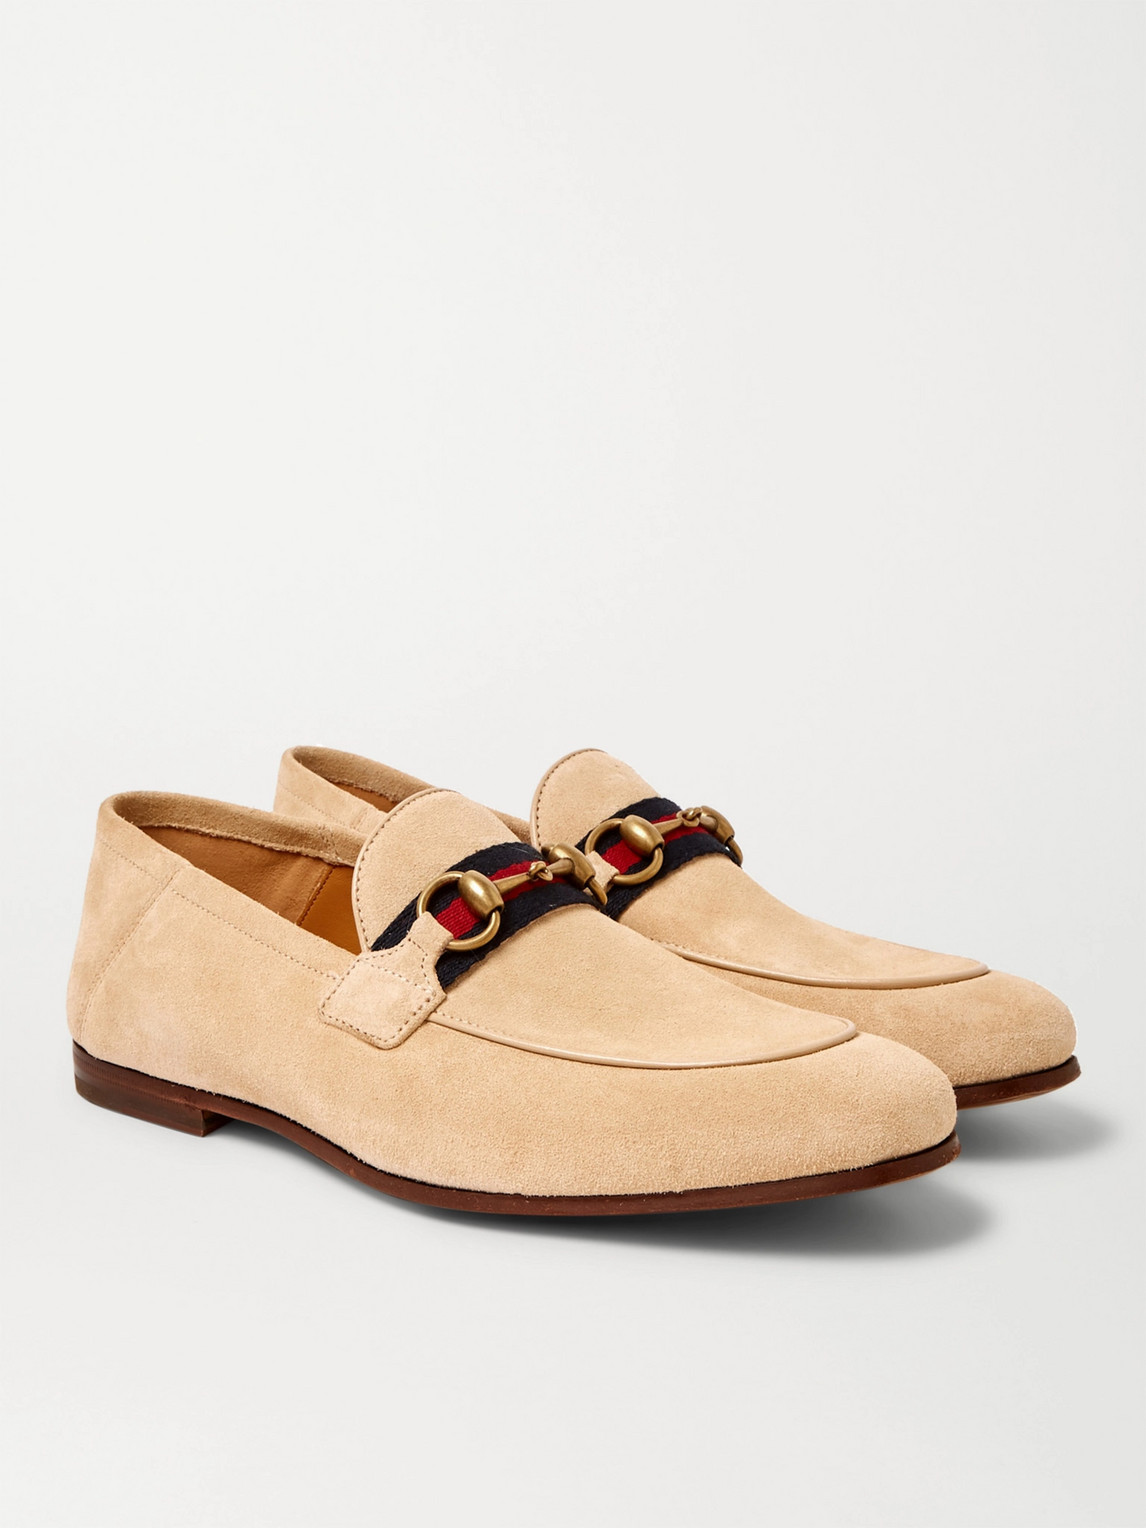 GUCCI BRIXTON HORSEBIT WEBBING-TRIMMED COLLAPSIBLE-HEEL SUEDE LOAFERS